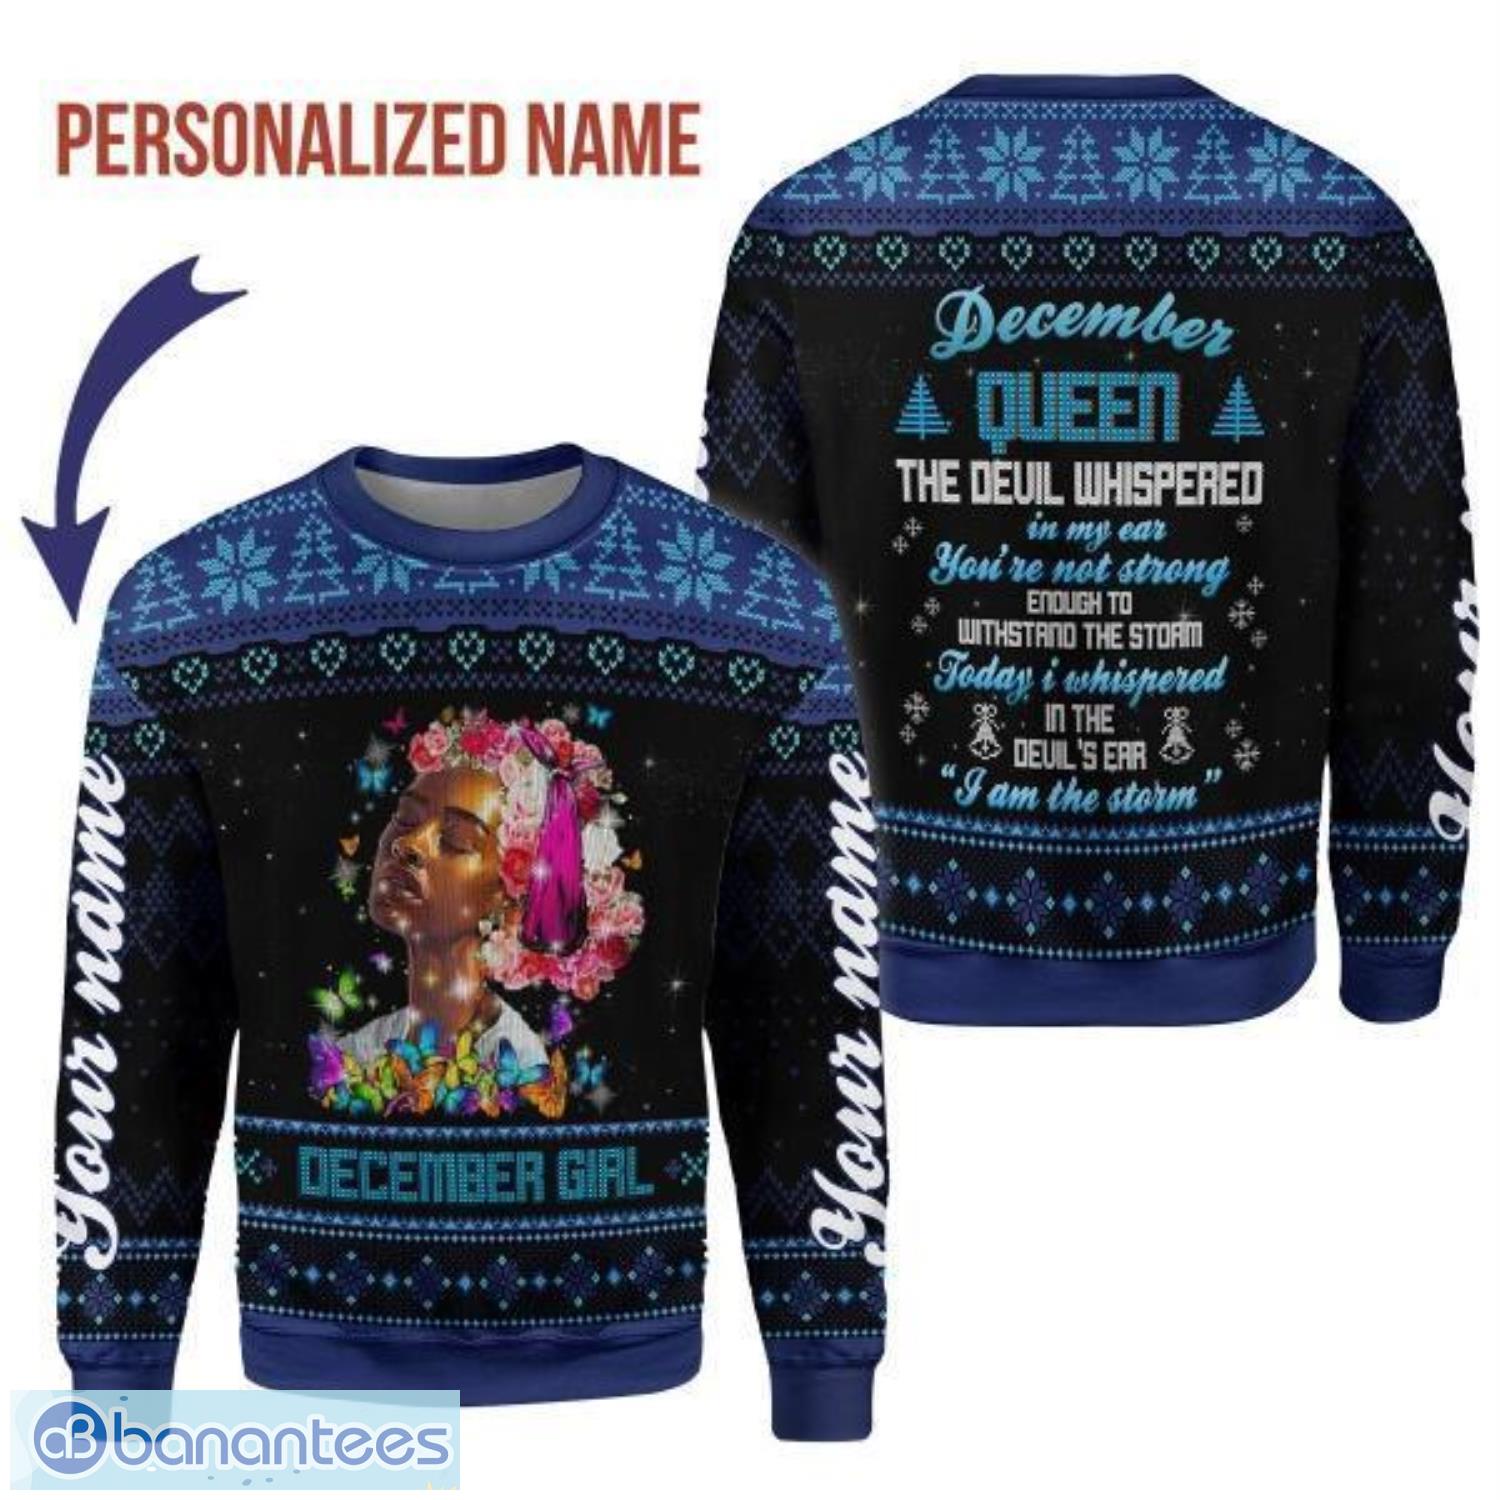 Personalized Name December Girl I Am The Storm 3D Ugly Christmas Sweater Christmas Gift Product Photo 1